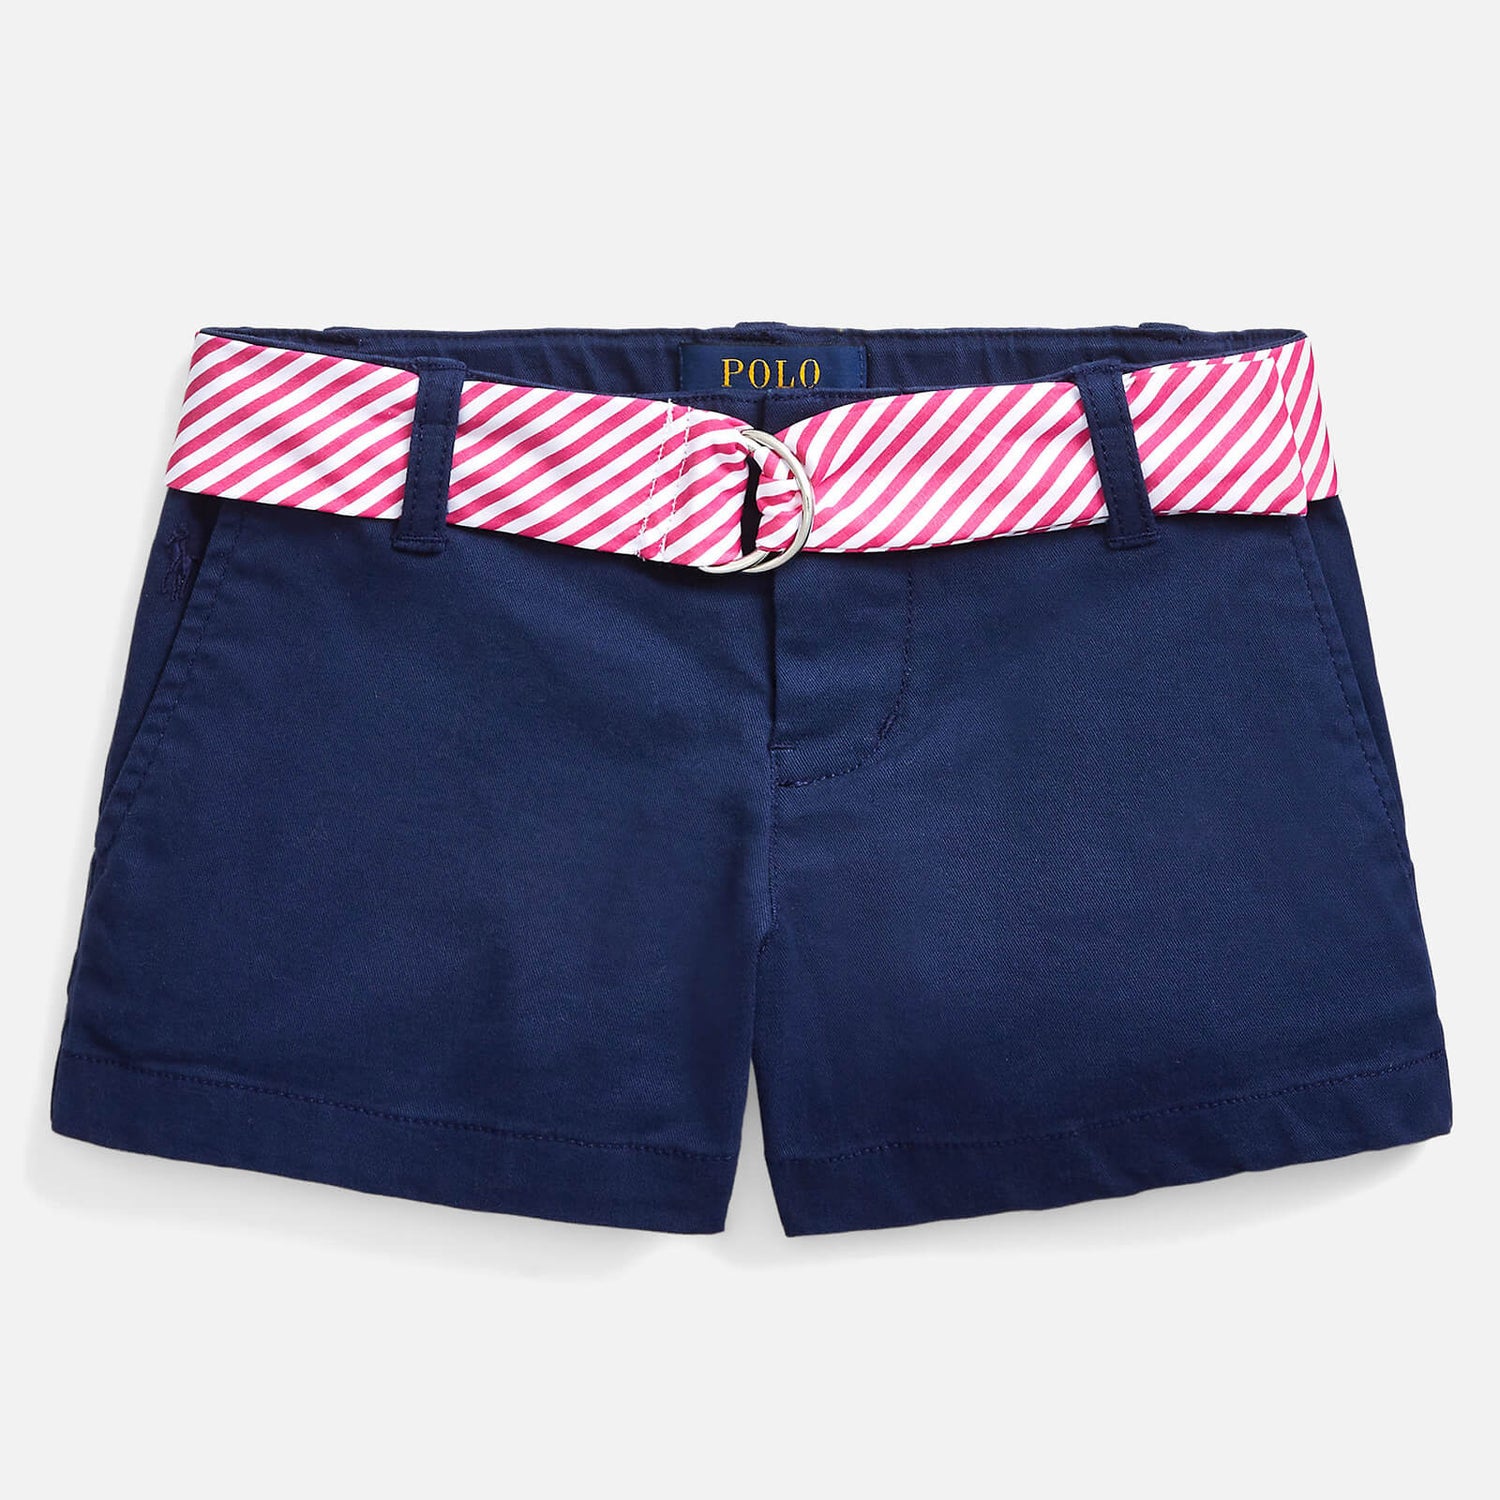 Polo Ralph Lauren Girls' Belted Shorts - Navy - 4 Years